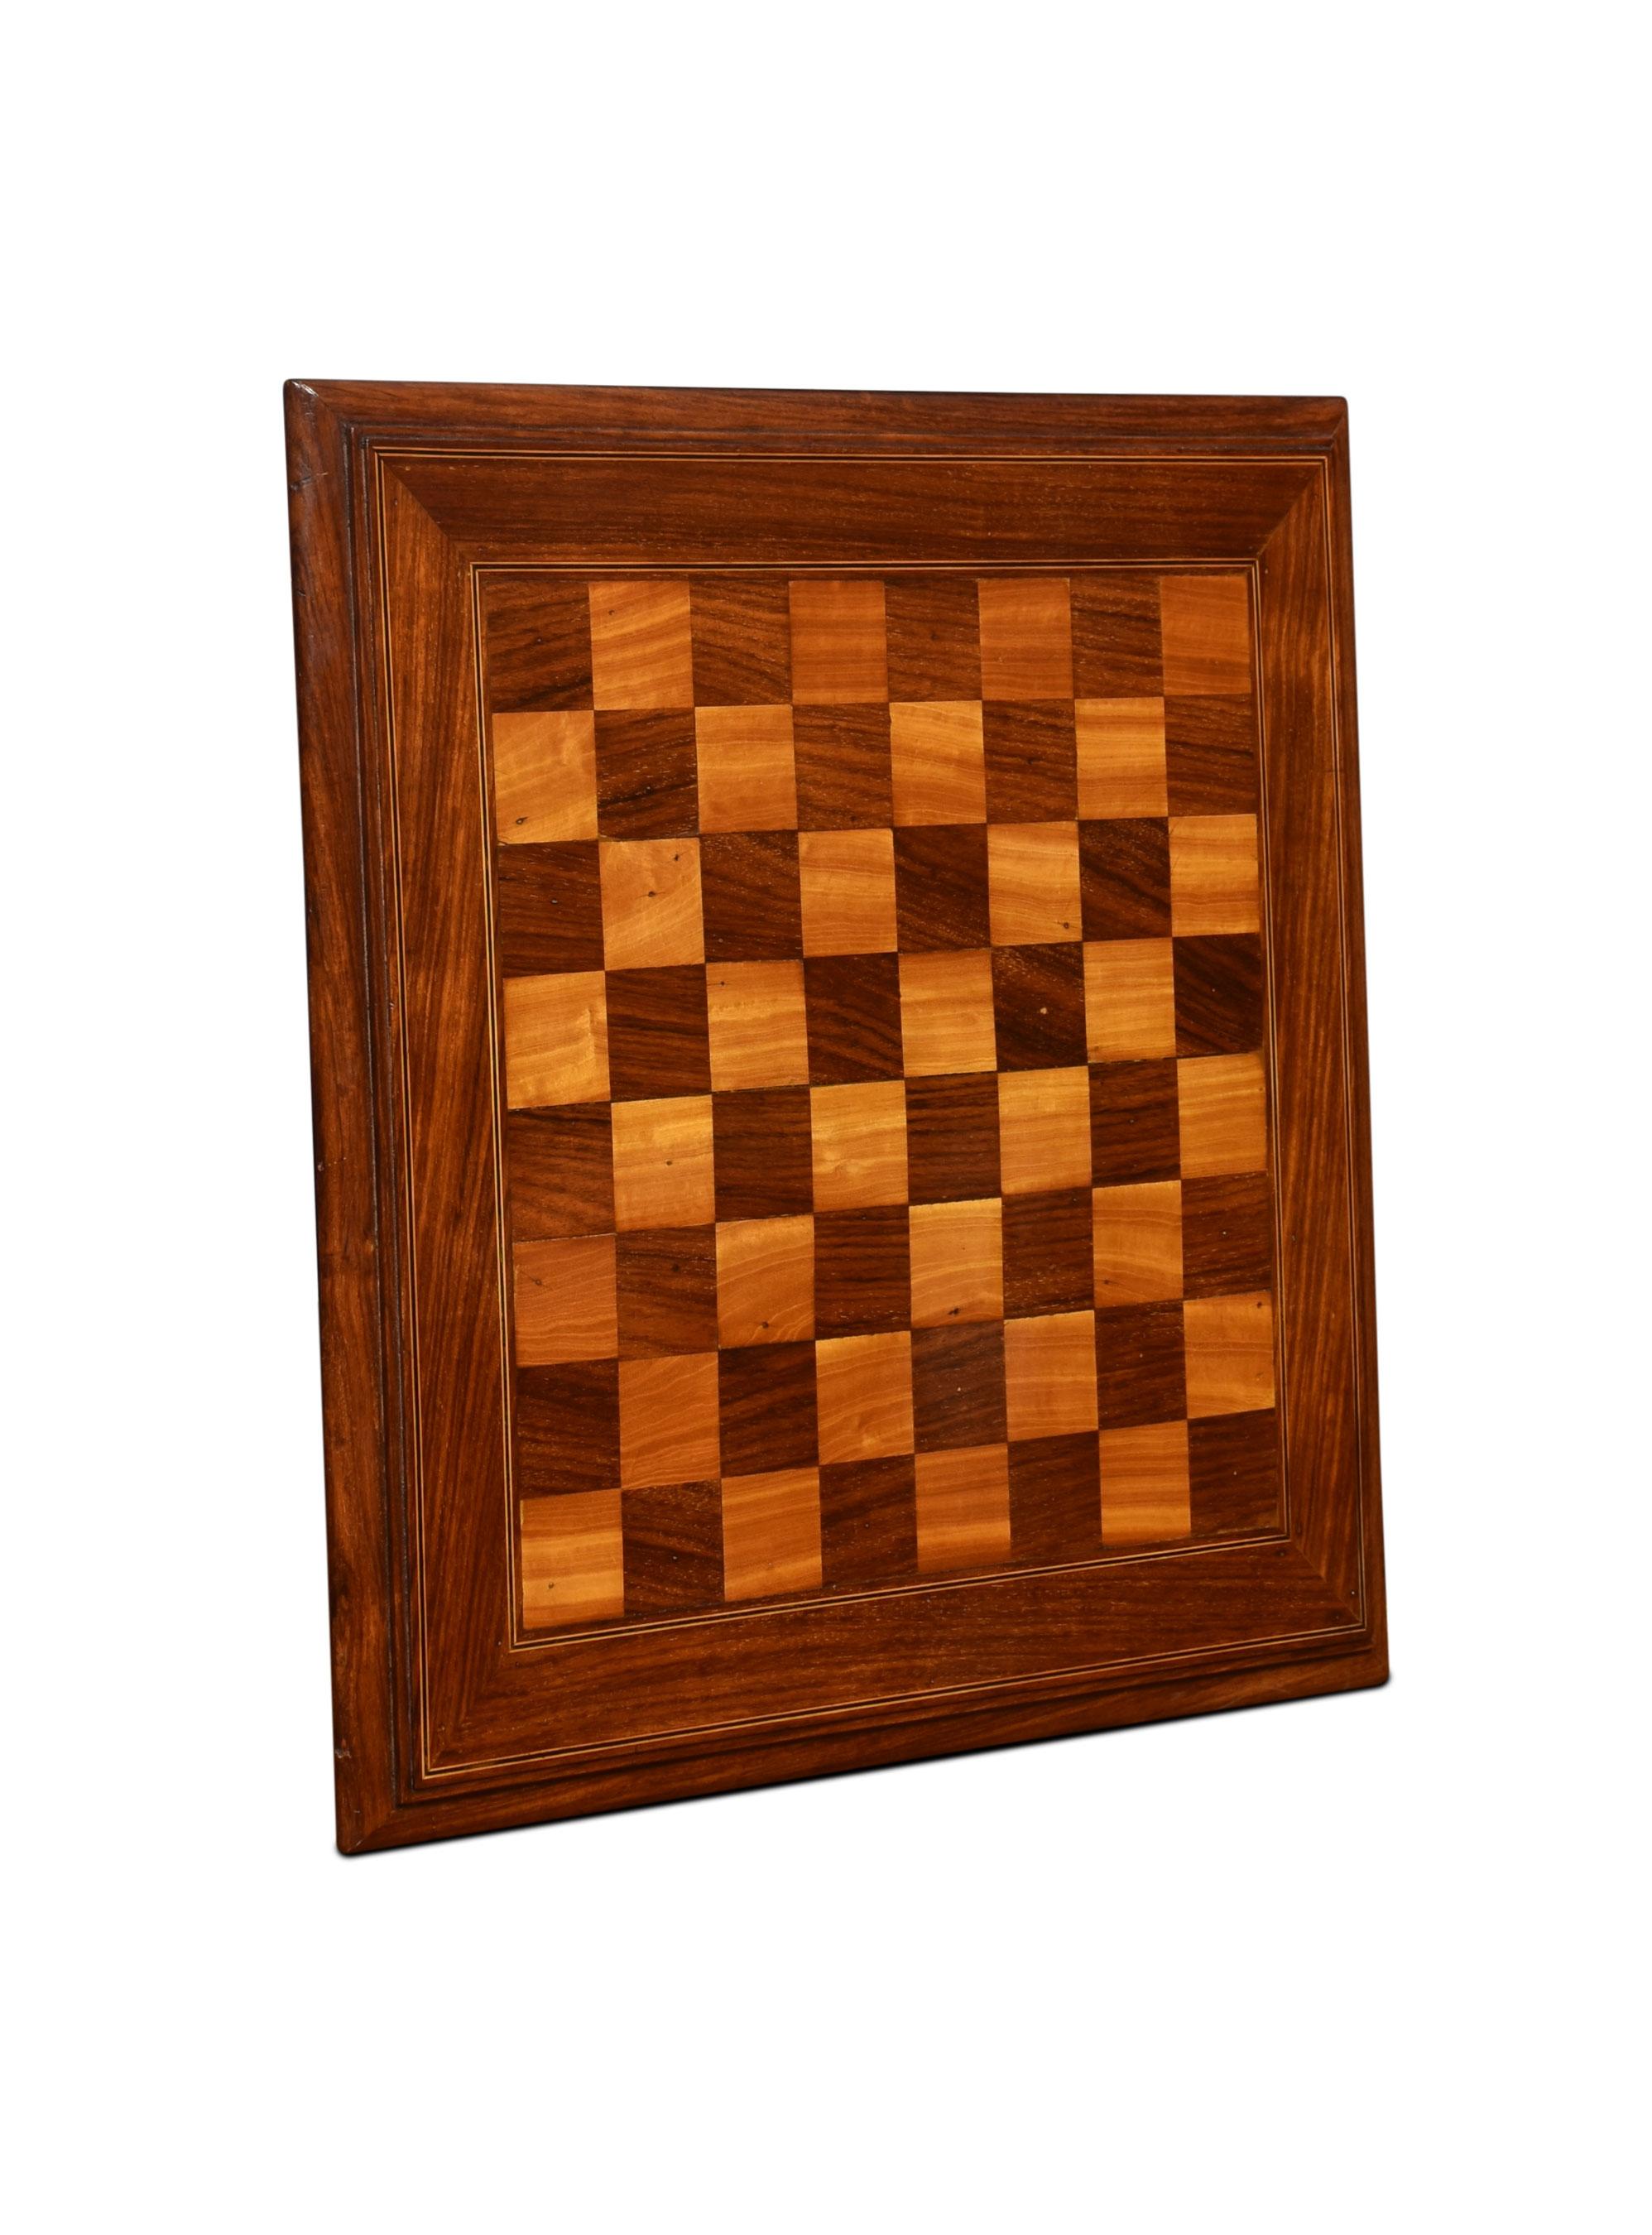 19th-century chess board, of typical square form with alternating piece squares.
Dimensions
Height 1 inches
Width 20.5 inches
Depth 20.5 inches.